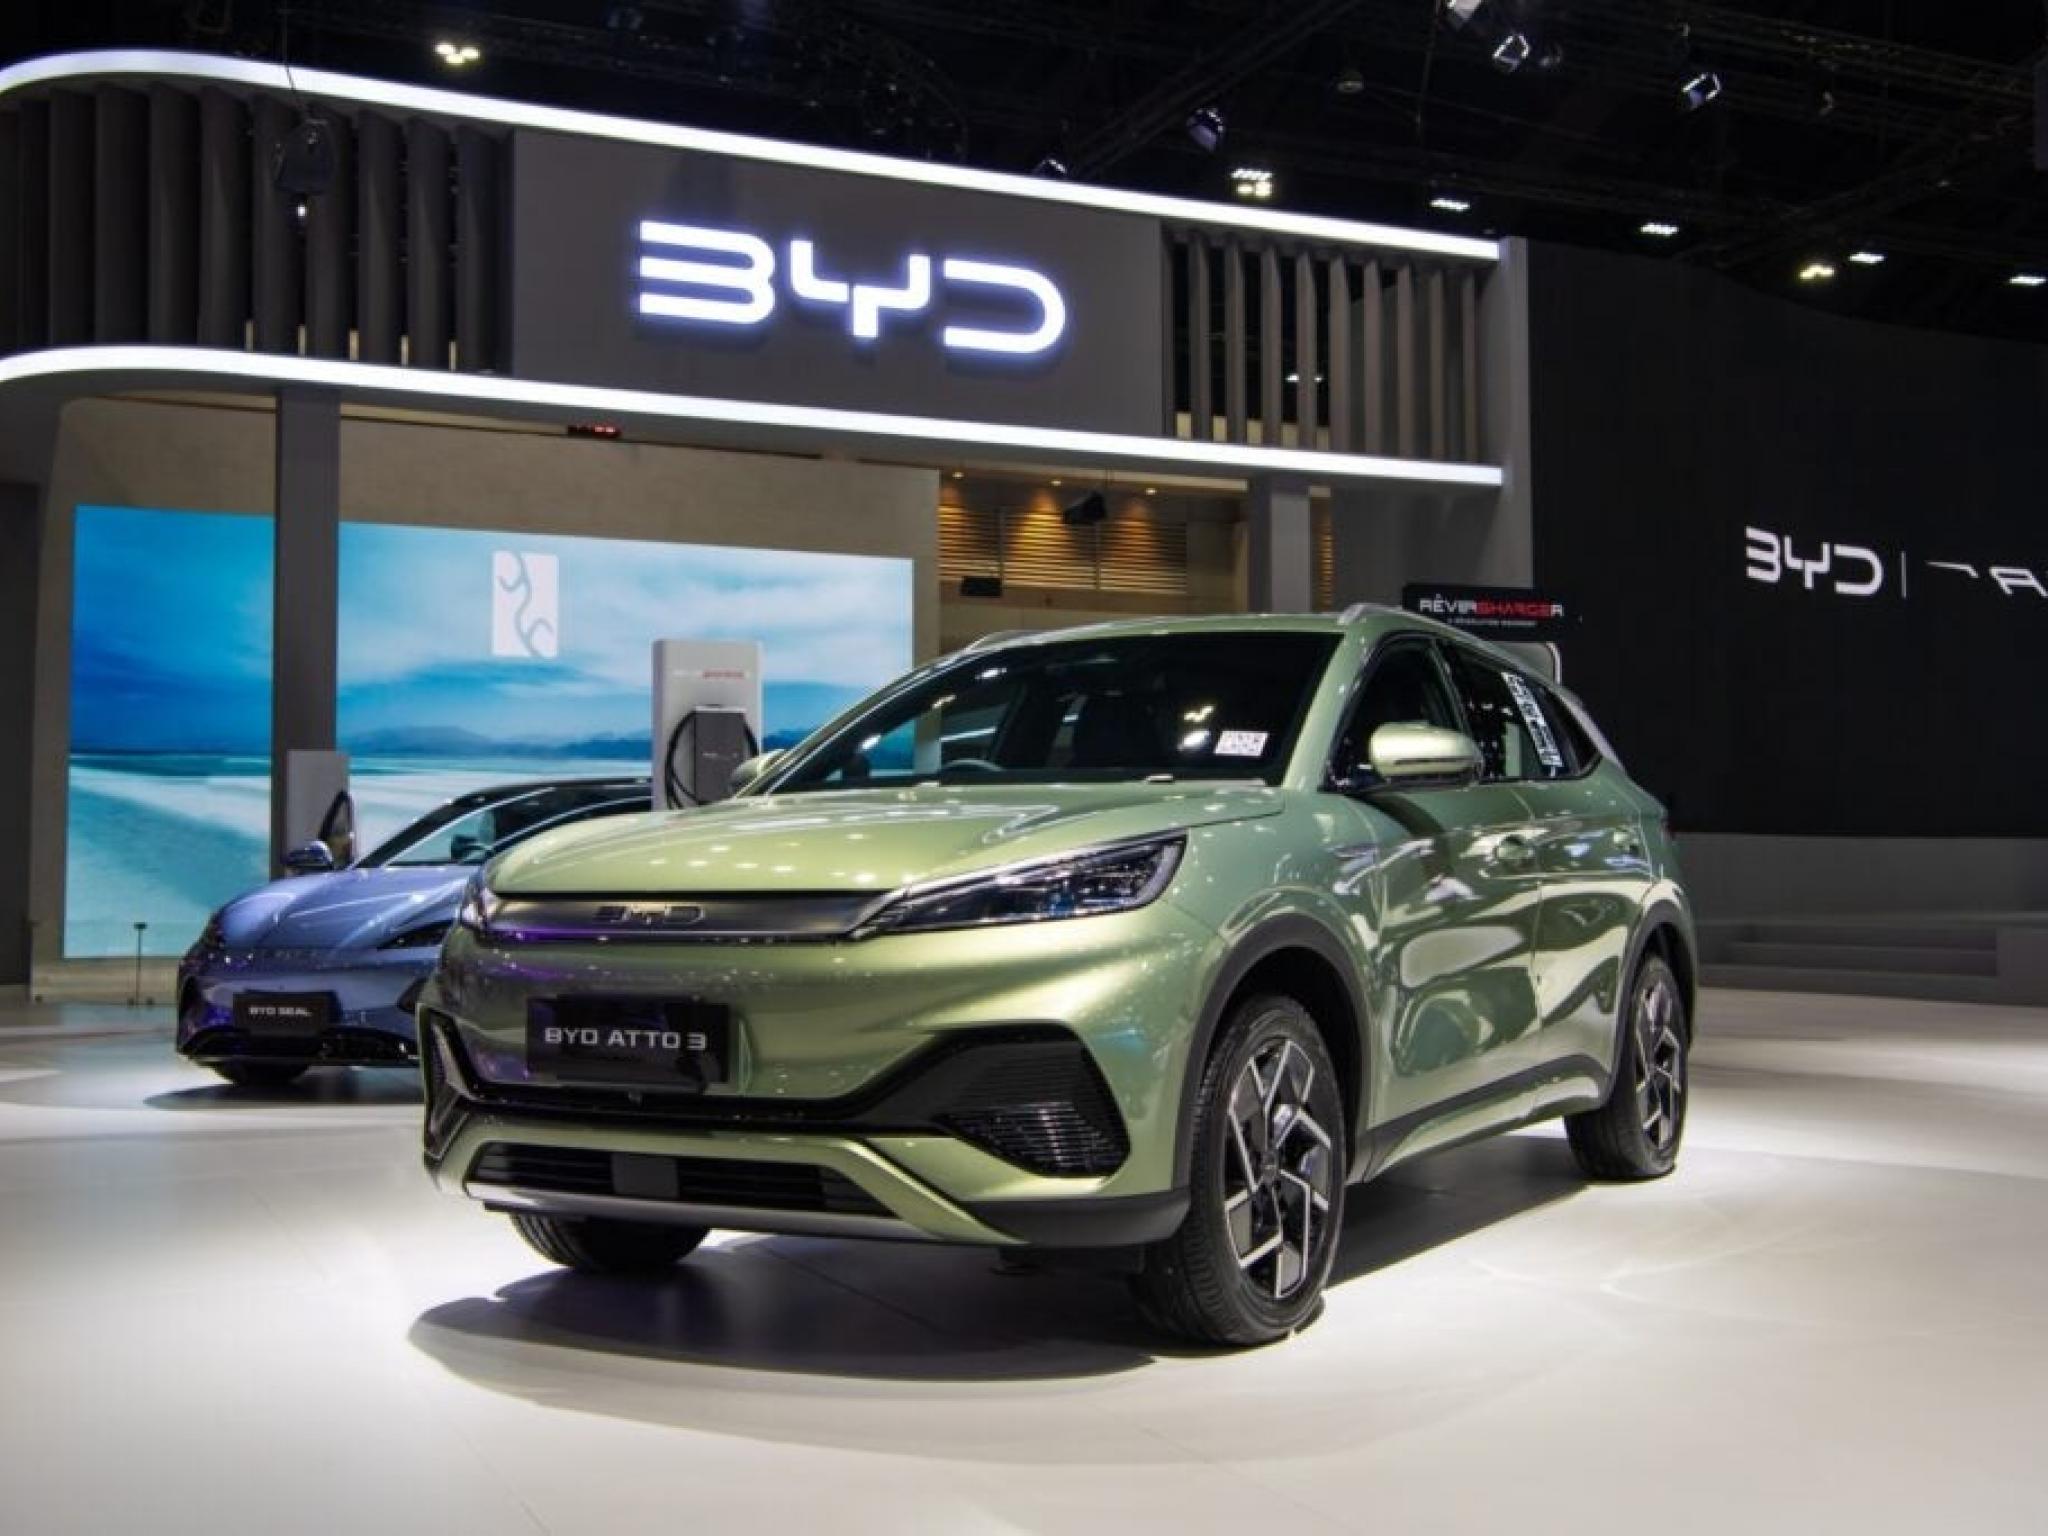  byd-a-tesla-rival-maintains-second-spot-in-ev-battery-makers-market-report 